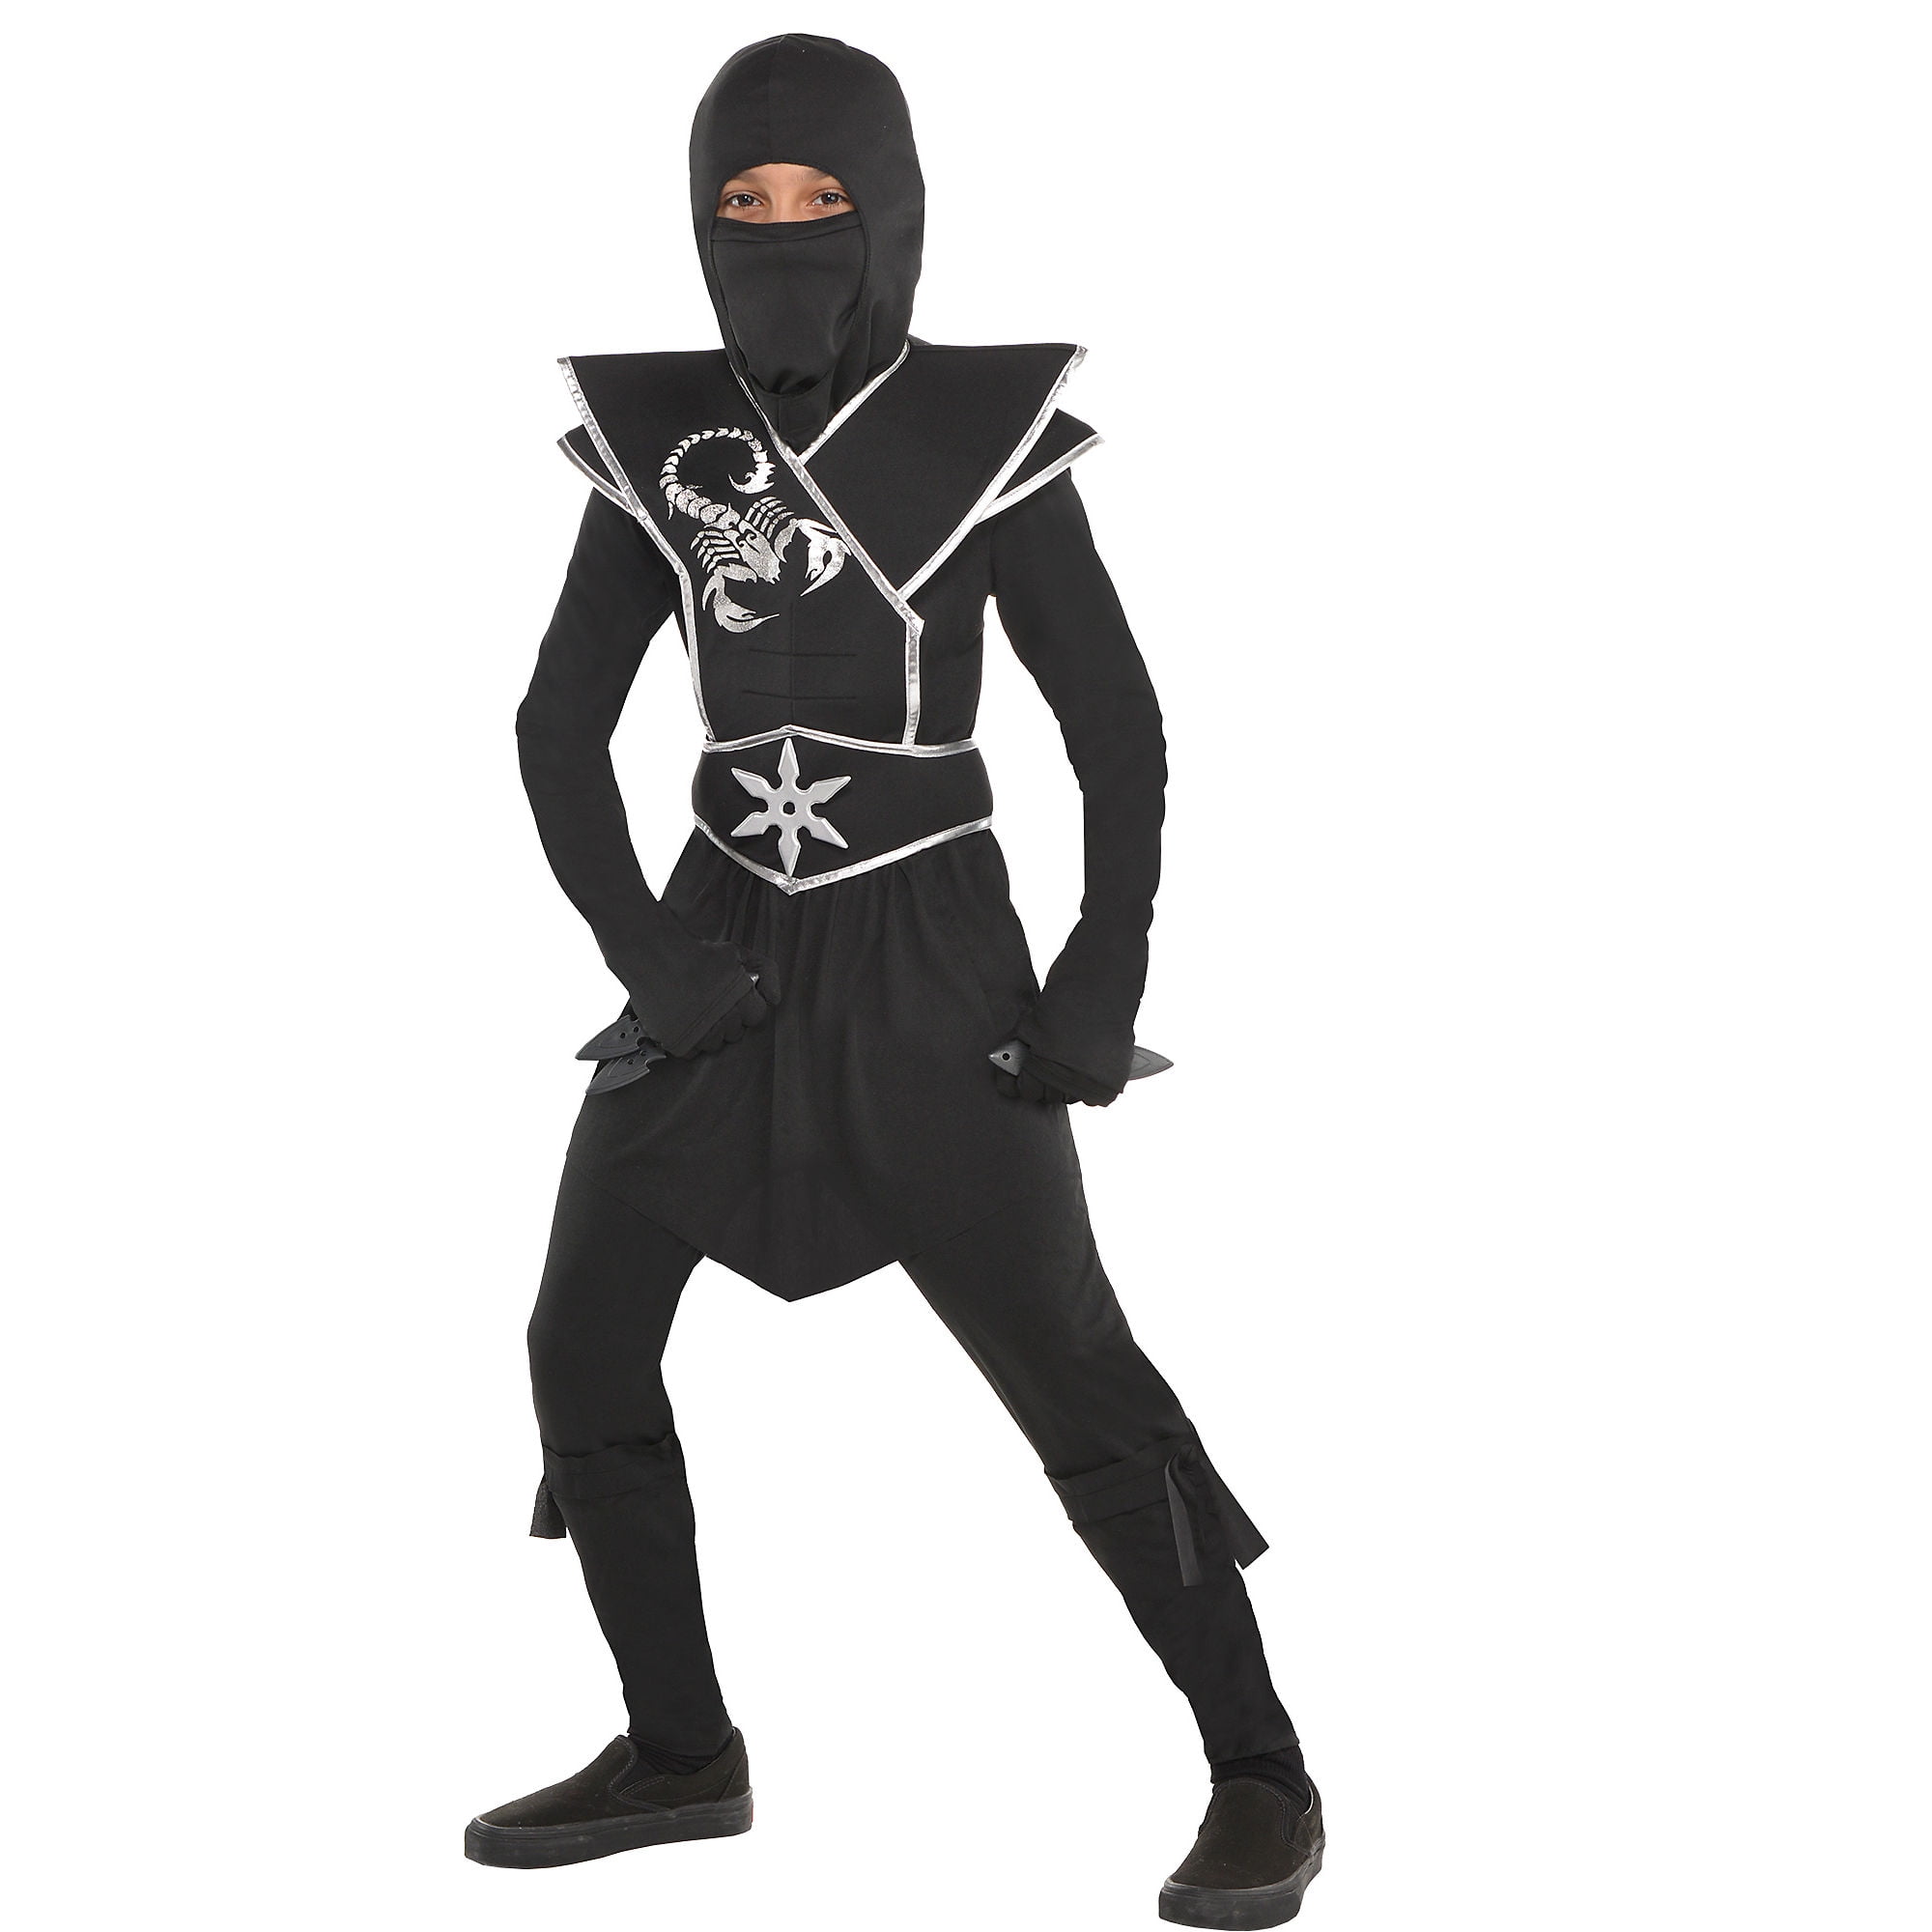 Suit Yourself Black Ops Ninja Costume for Boys, Size Small, Includes  Jumpsuit, Face Scarf, Ninja Star and Hood 